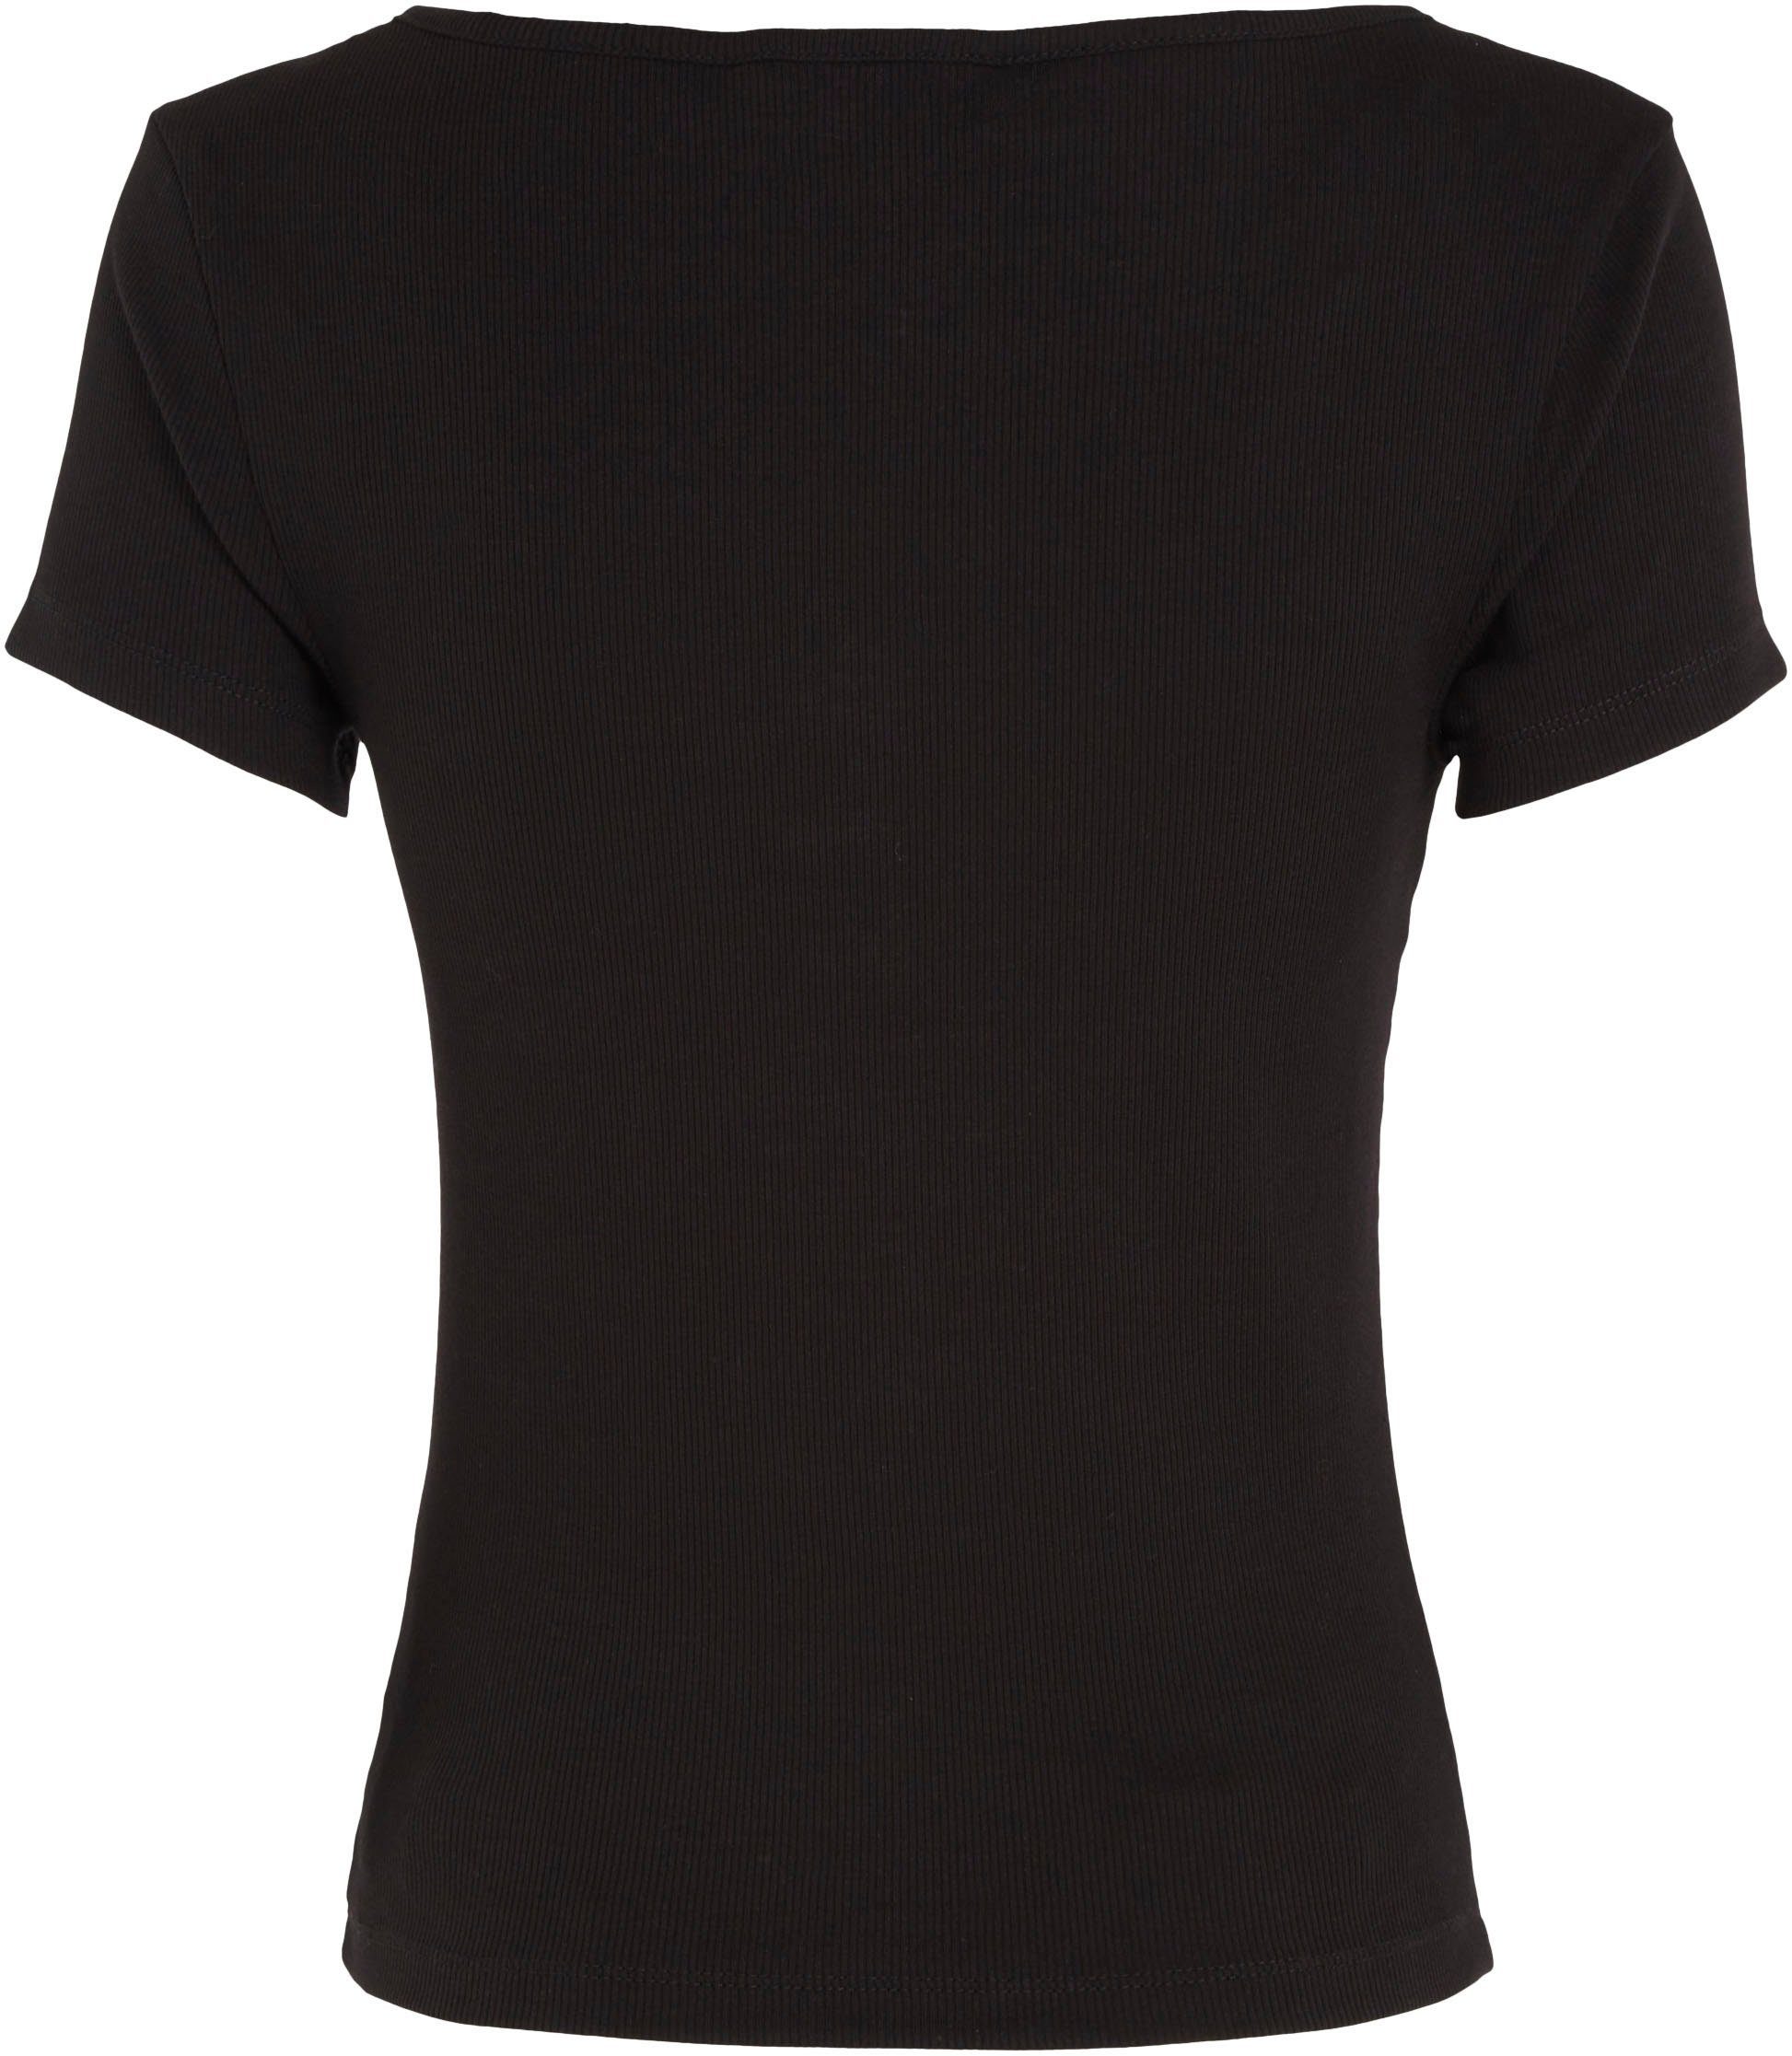 Tommy Jeans T-Shirt TJW Logostickerei Black Tommy BUTTON BBY Jeans mit C-NECK RIB